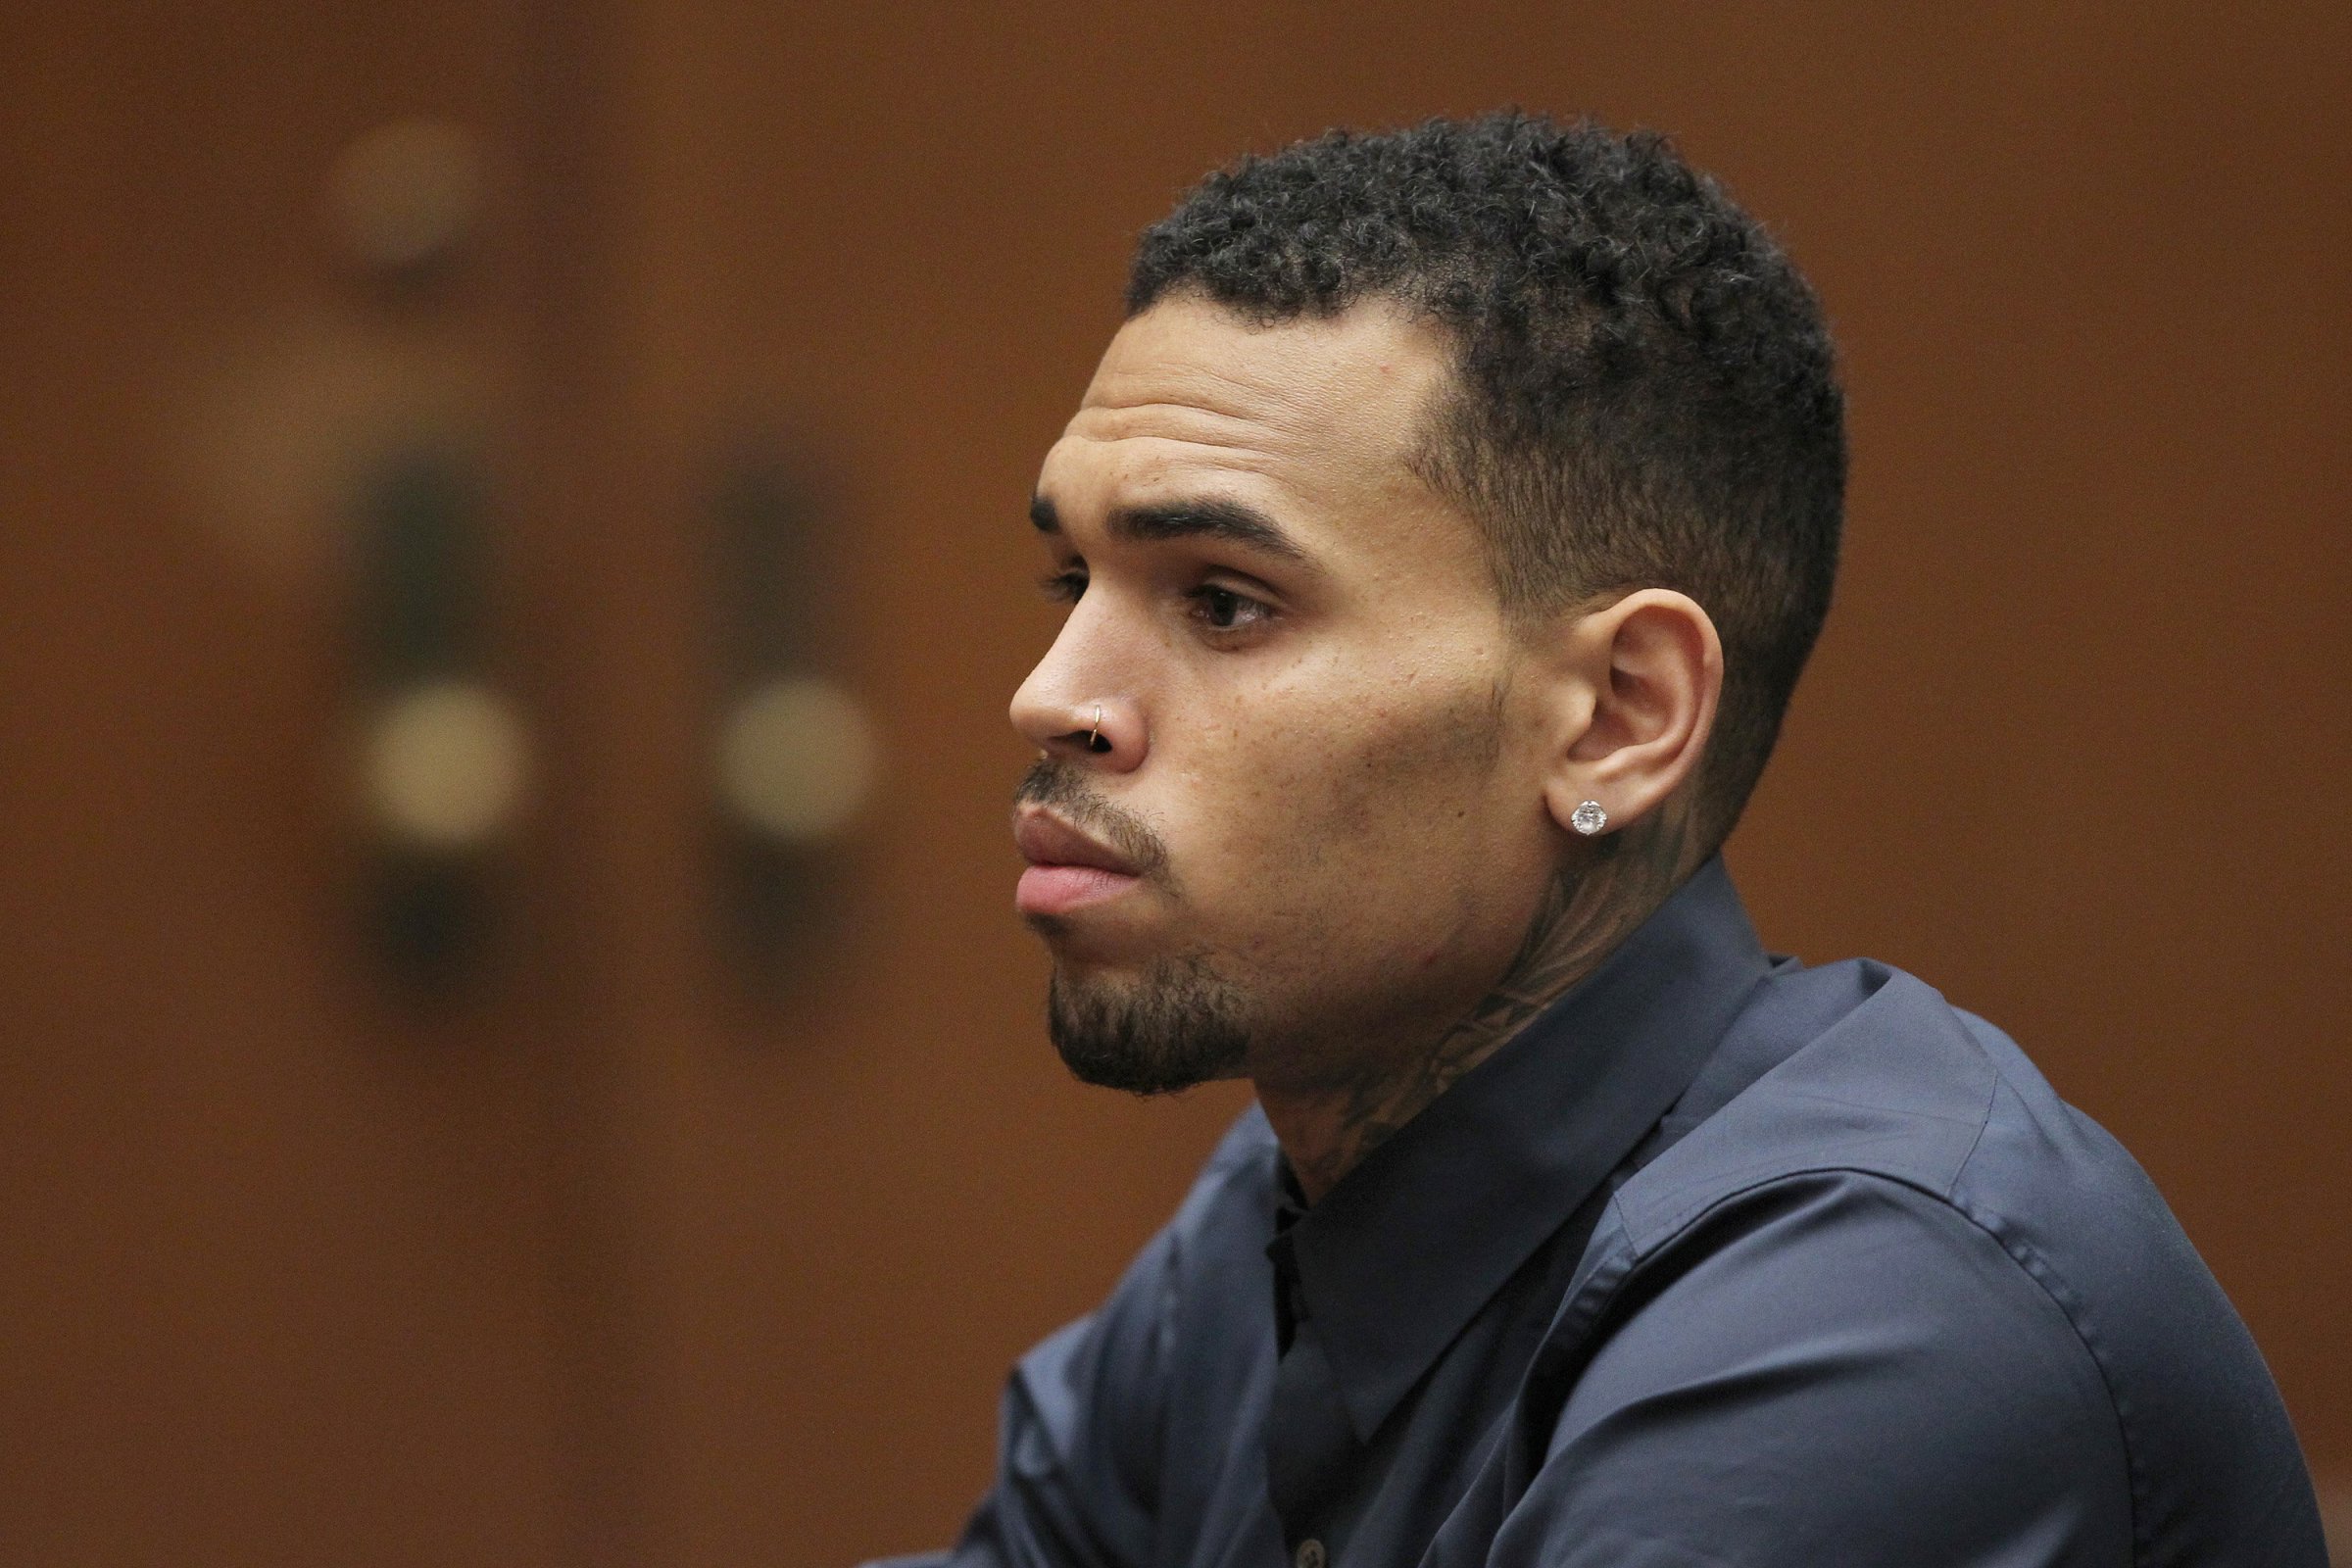 Chris Brown in court for a probation progress hearing on Feb. 3, 2014 in Los Angeles.